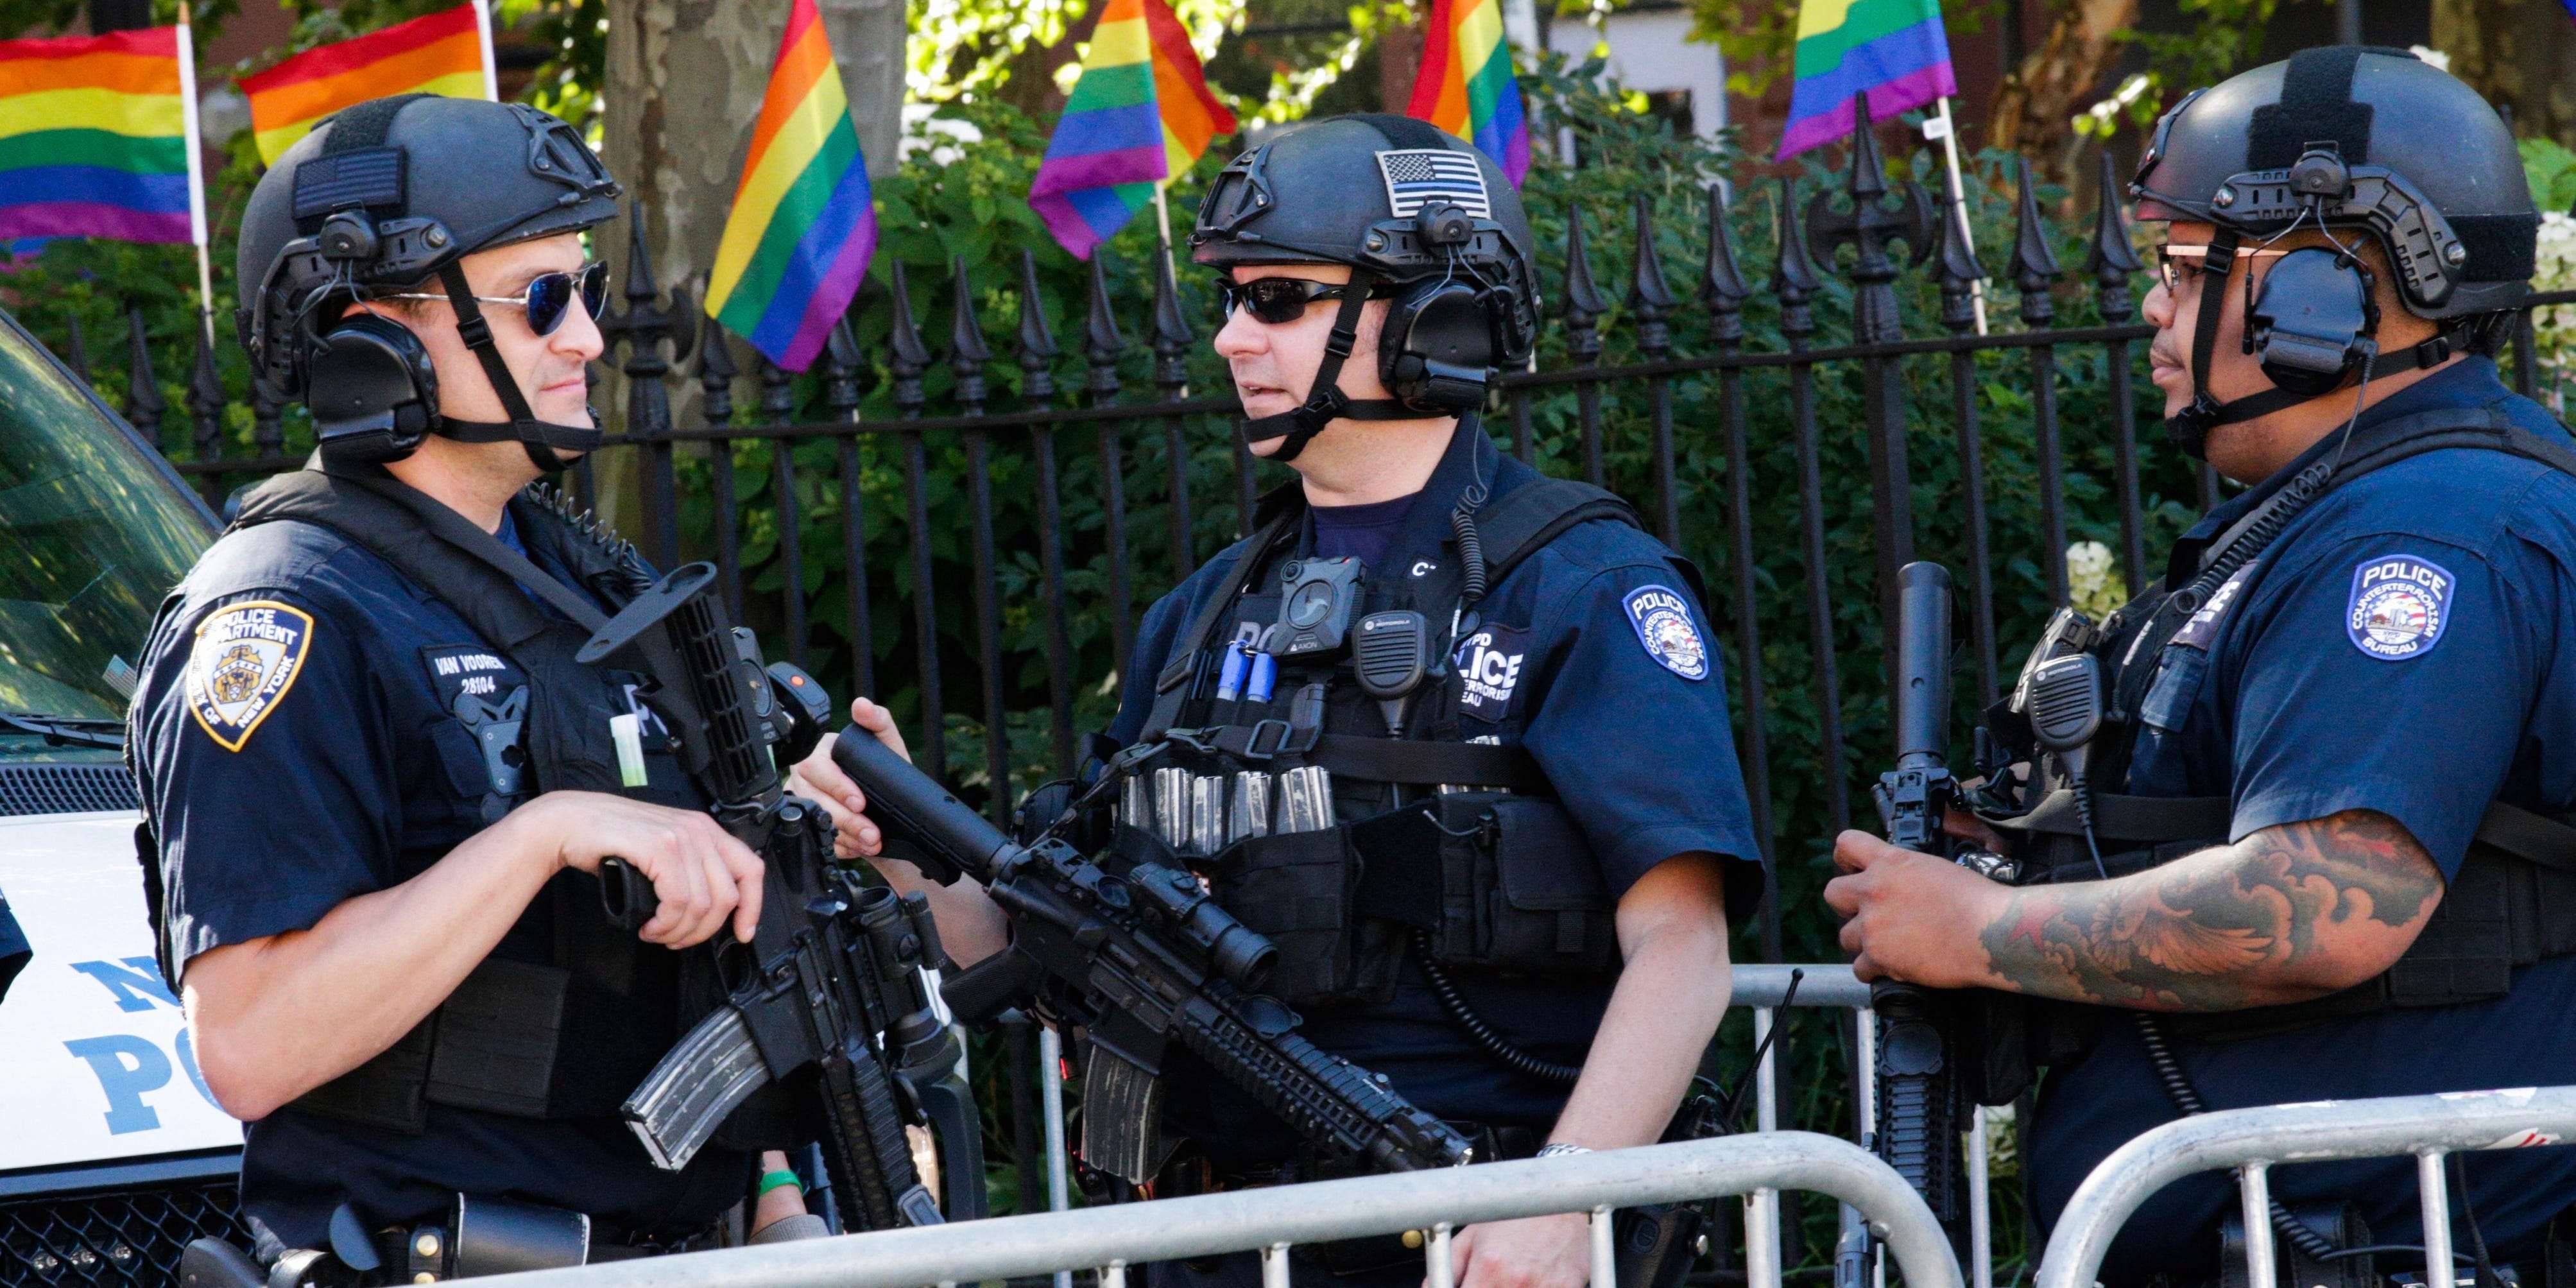 New York City Pride says it will ban police through 2025 and 'reduce